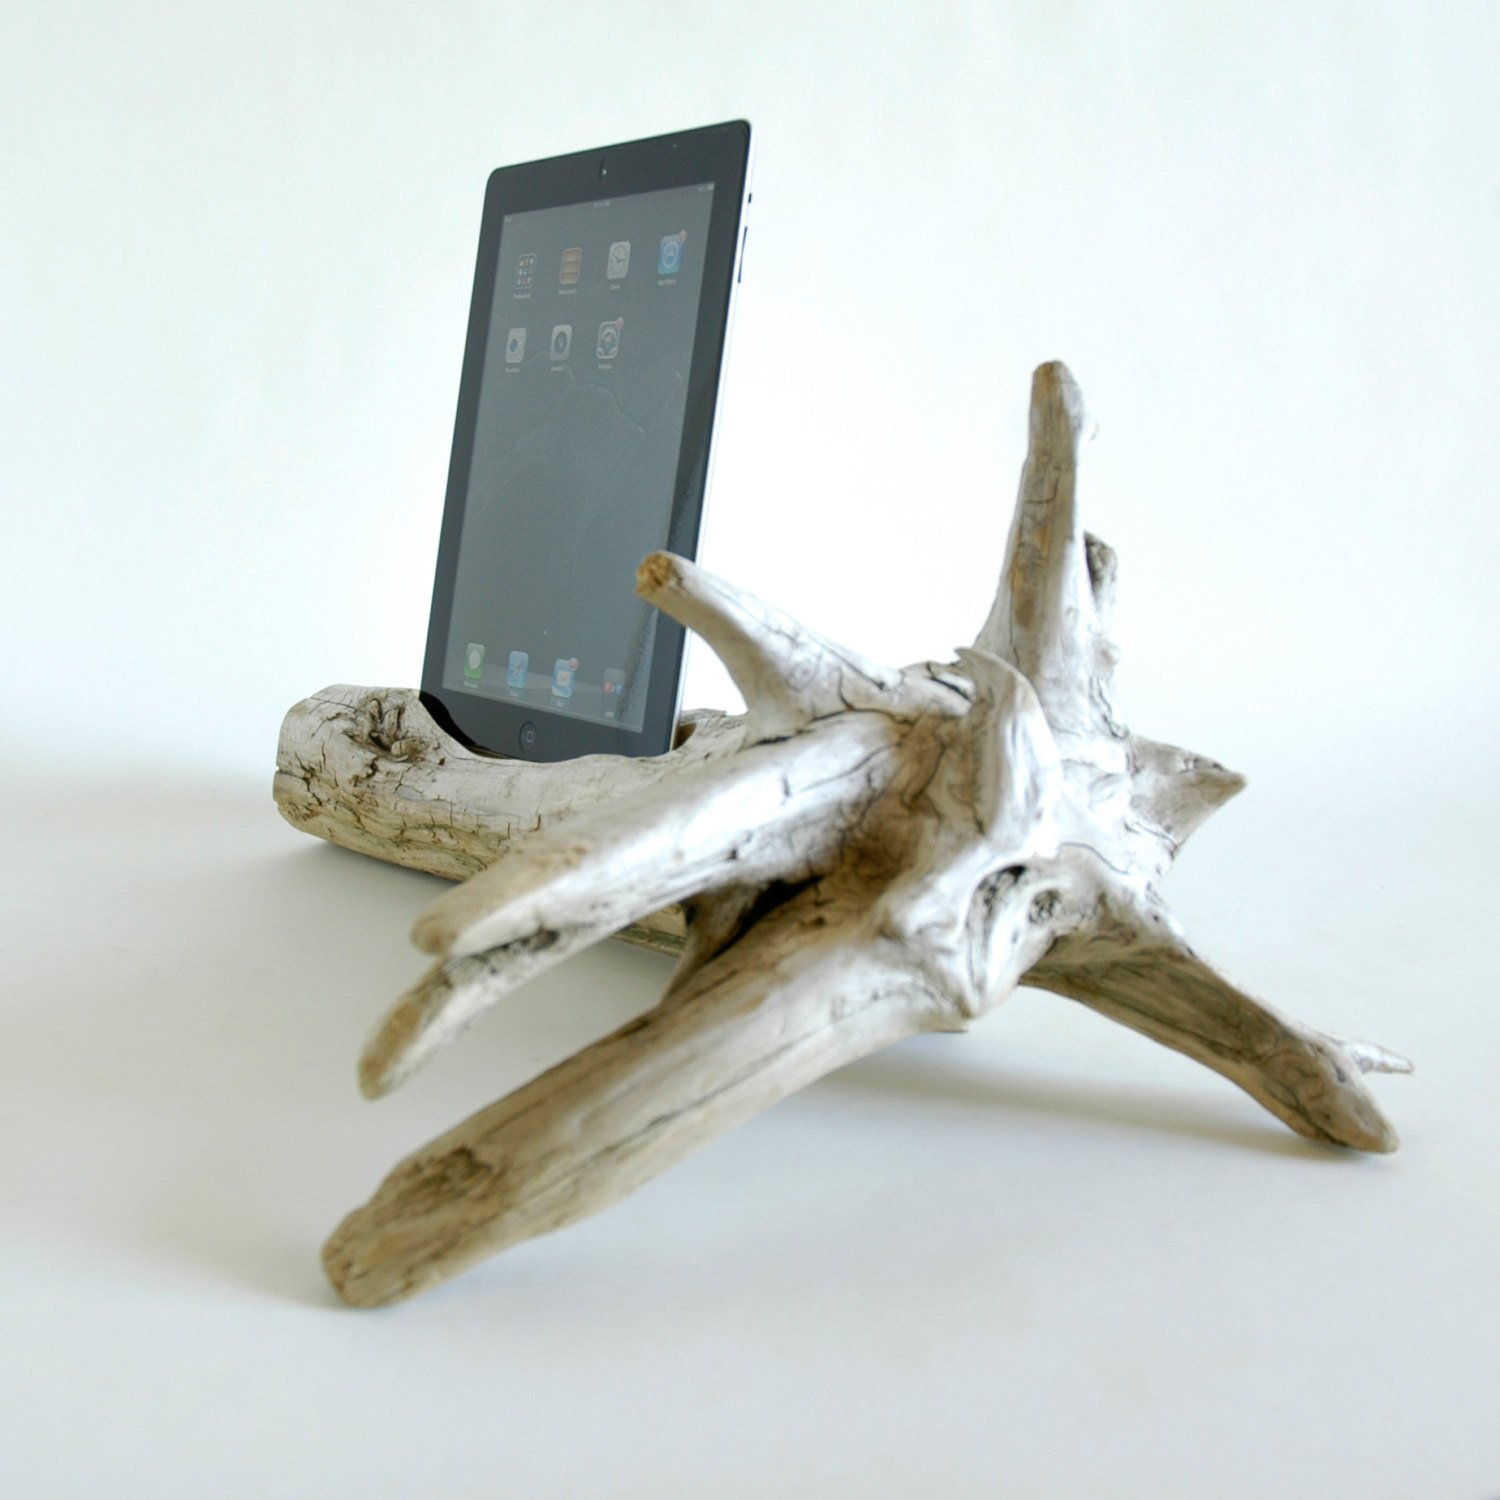 22 Easy Diy Driftwood Docking Stations For Your Devices,Best Bright Color Combinations